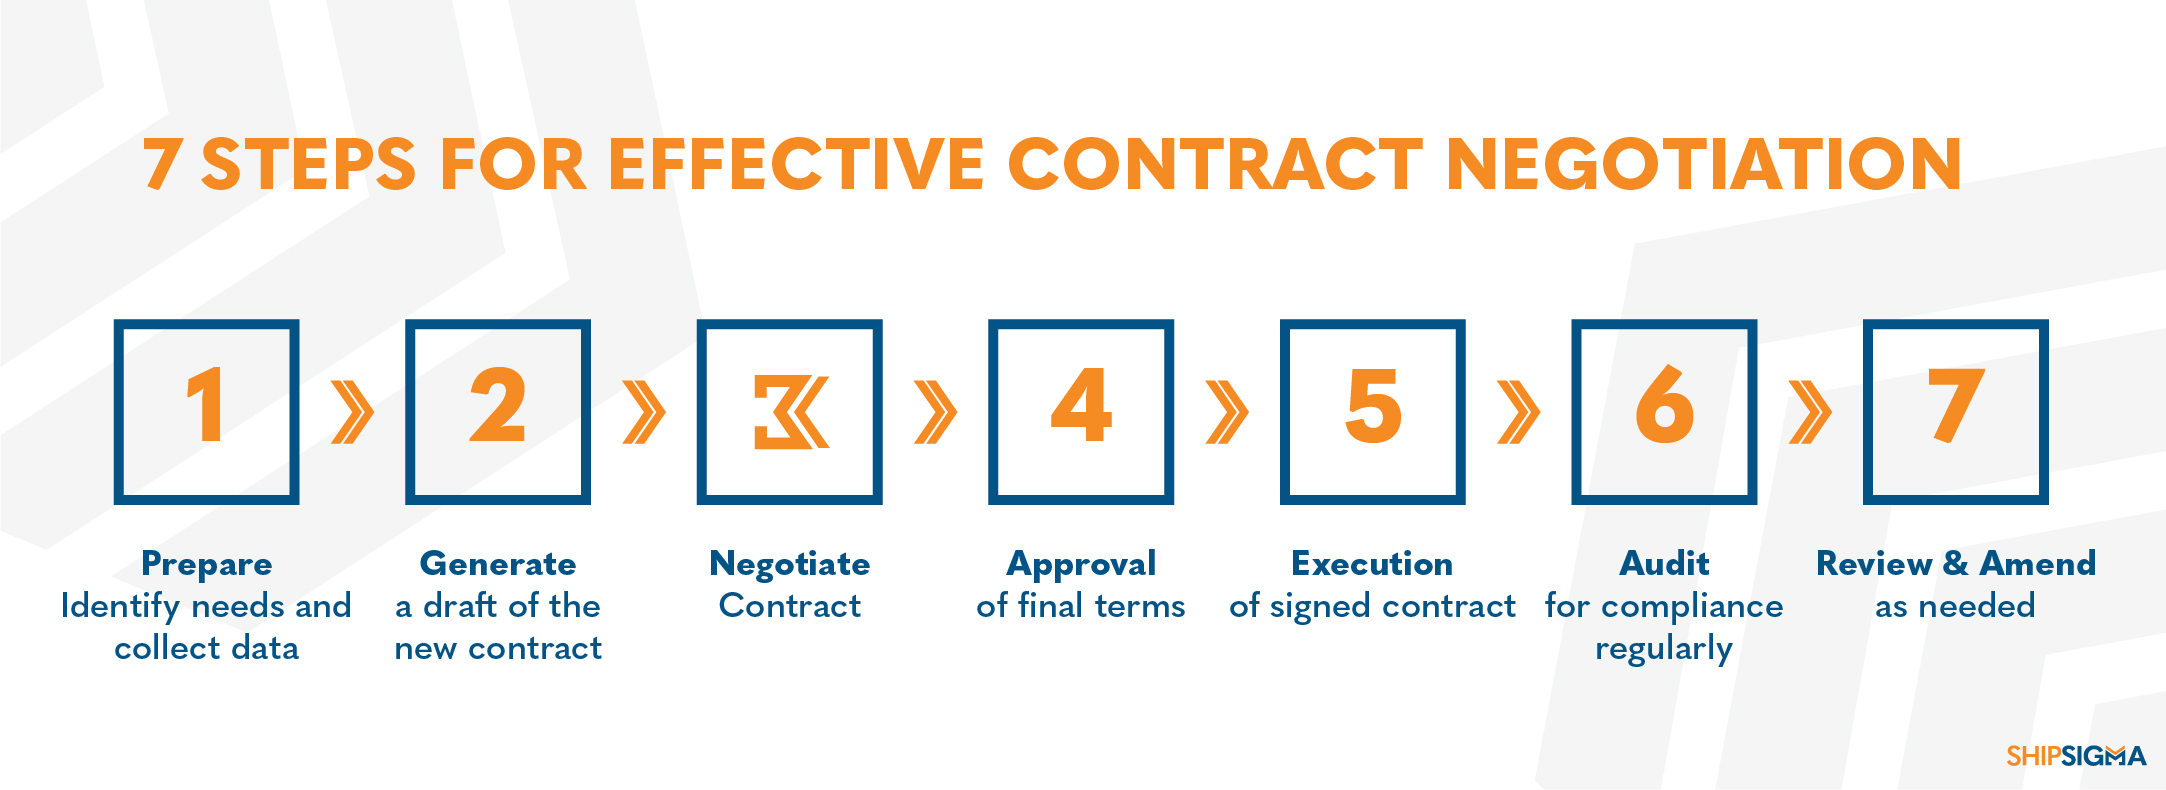 Successful contract negotiation starts with preparation.